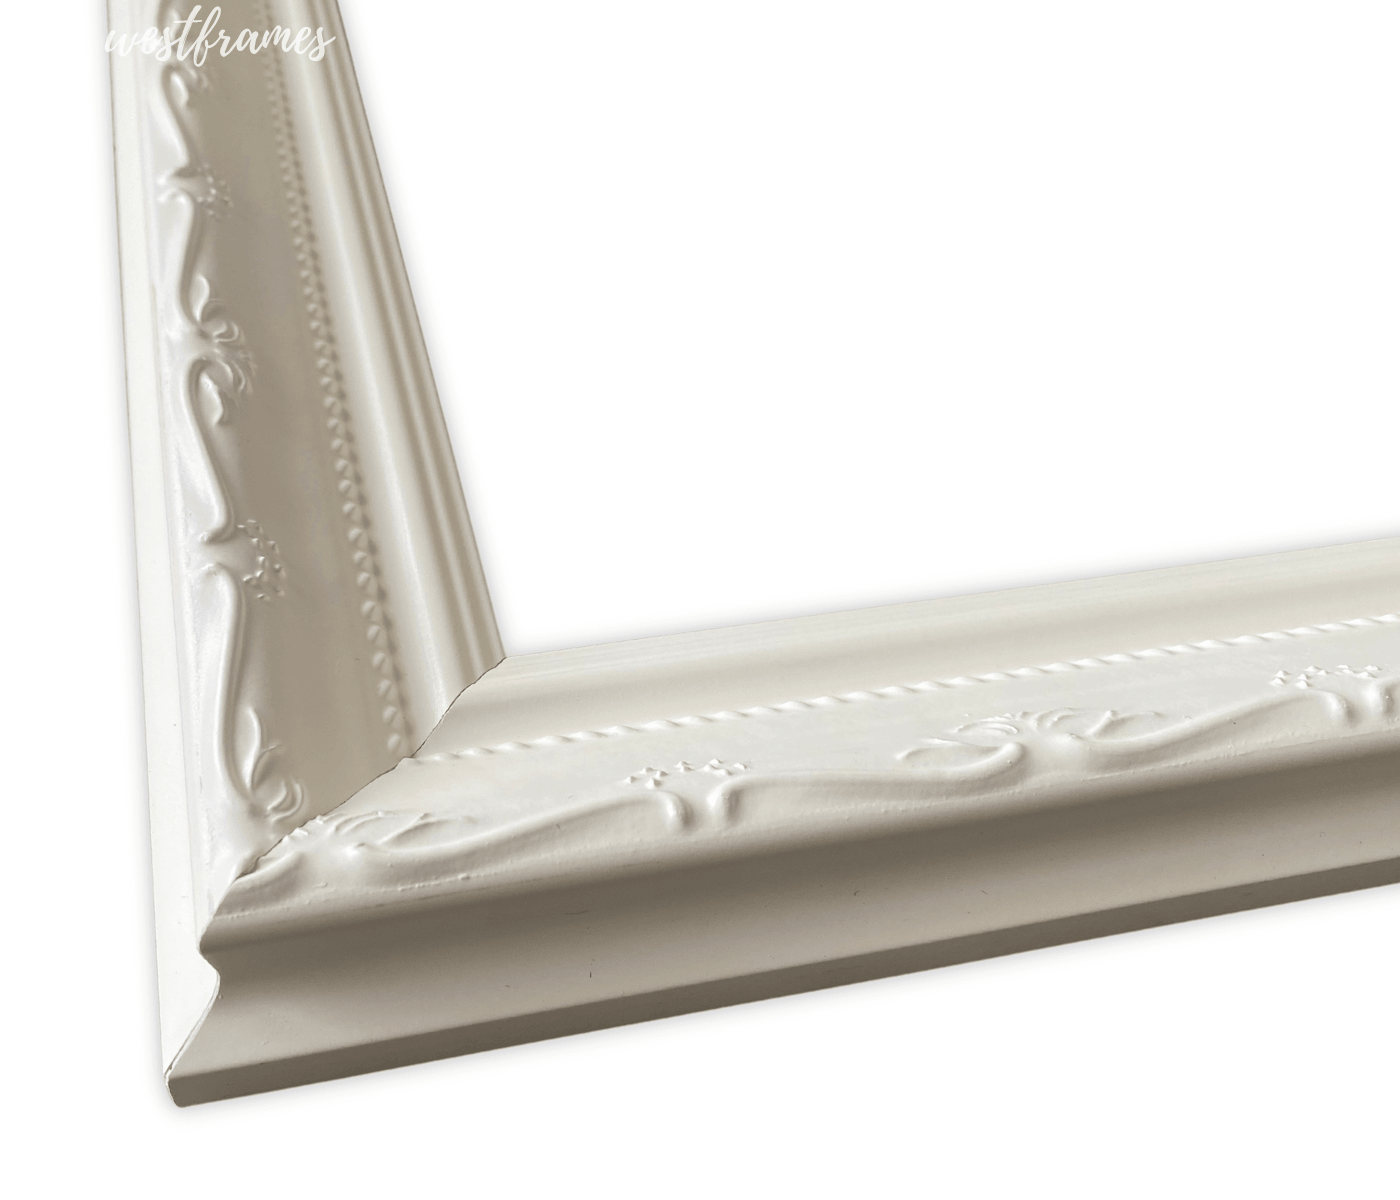 Camilla French Ornate Shabby White Wood Wall Picture Frame 2" Wide - West Frames